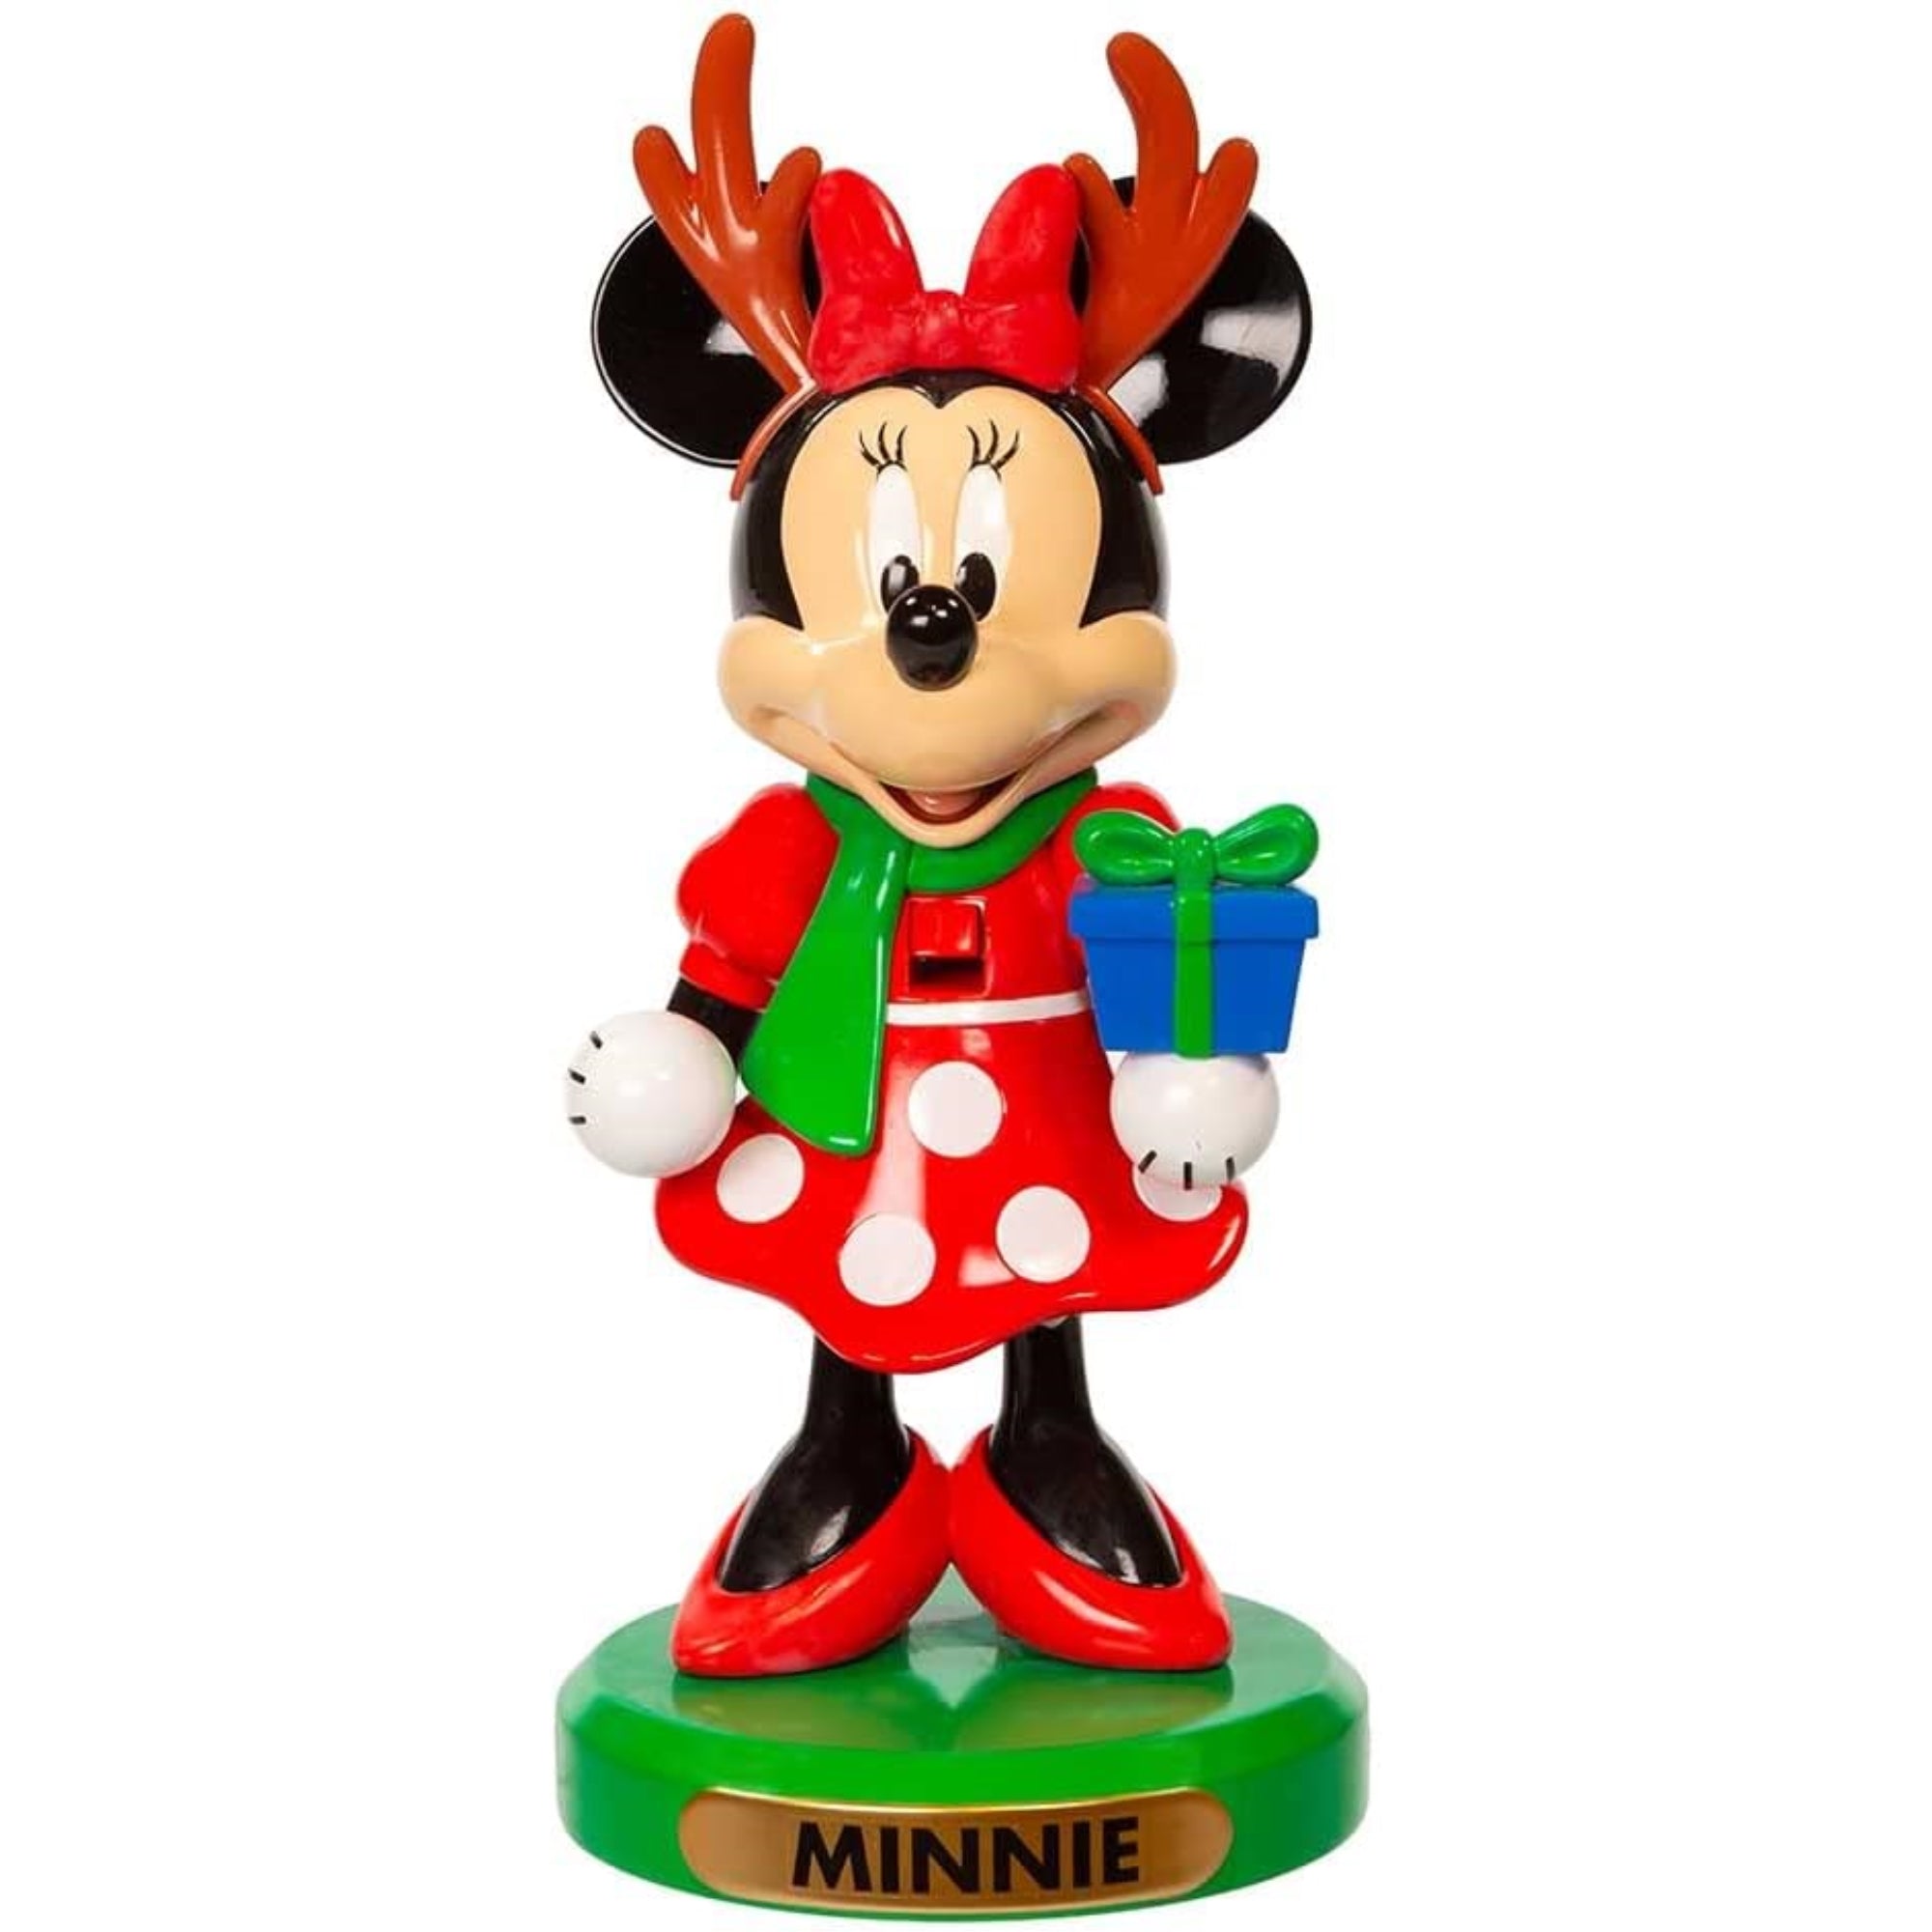 Kurt Adler Disney Minnie Mouse with Antlers and Present Nutcracker, 6"